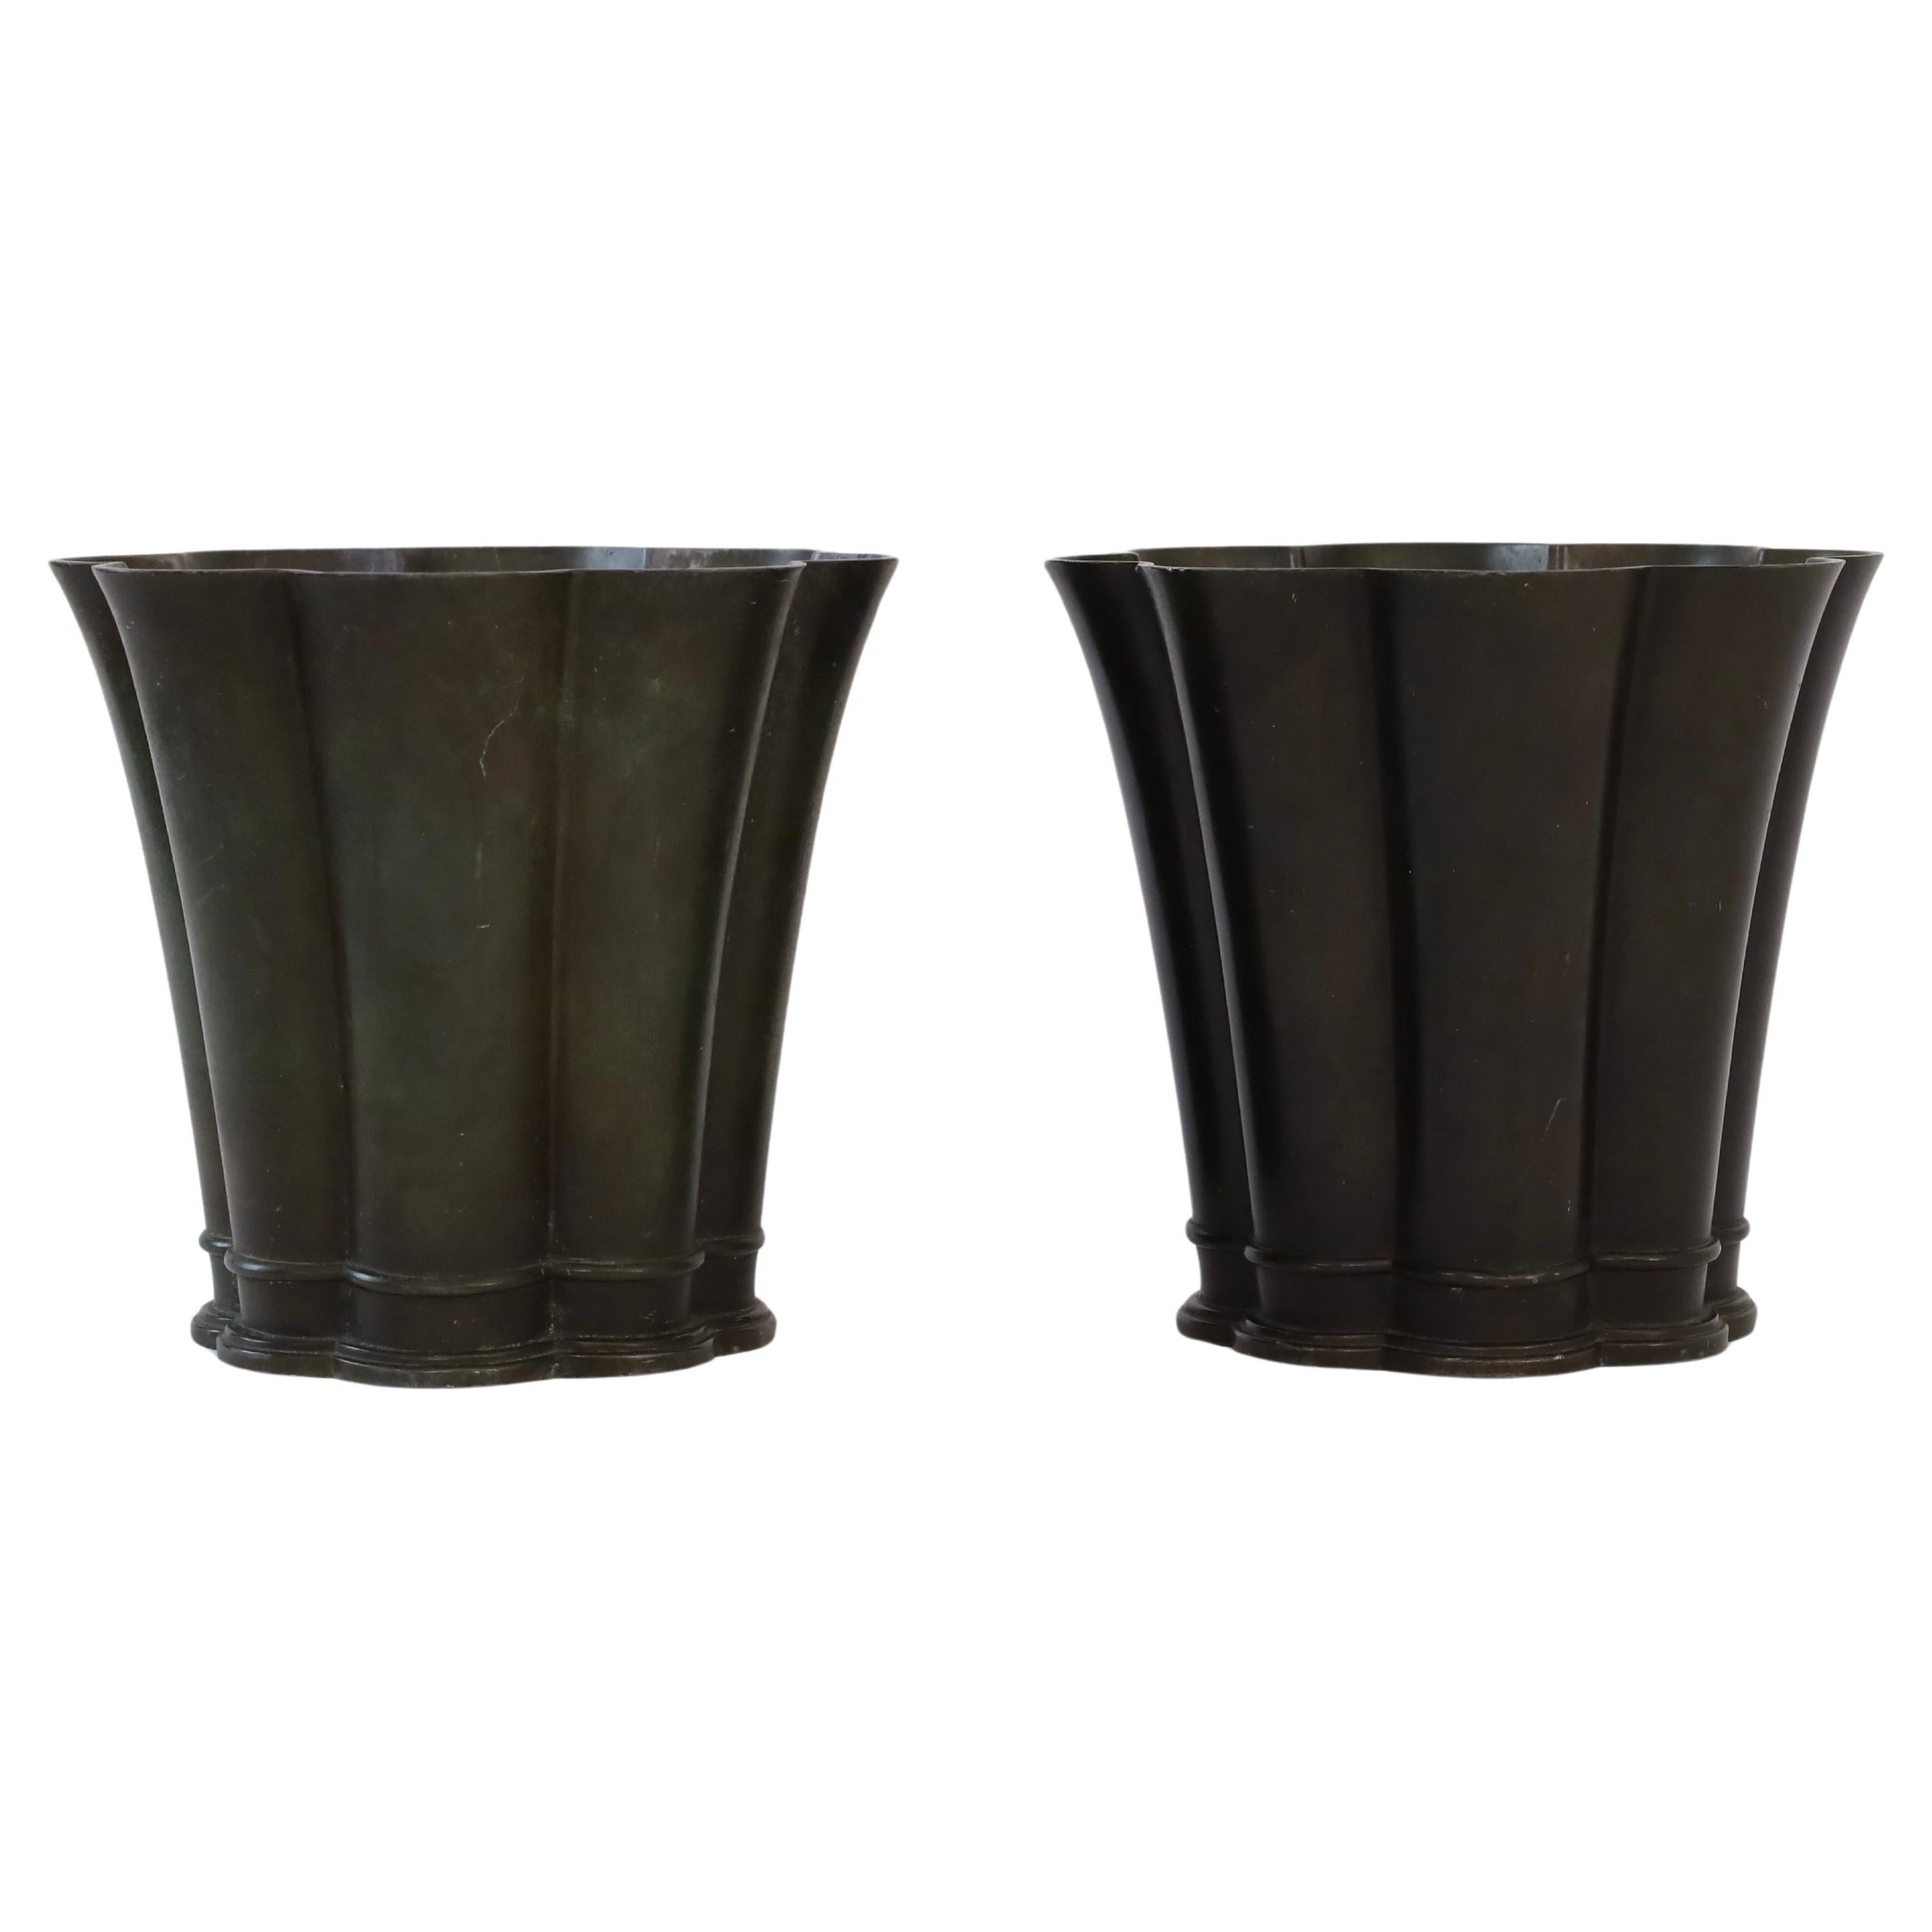 Set of scalloped art deco vases by Just Andersen, 1940s, Denmark For Sale